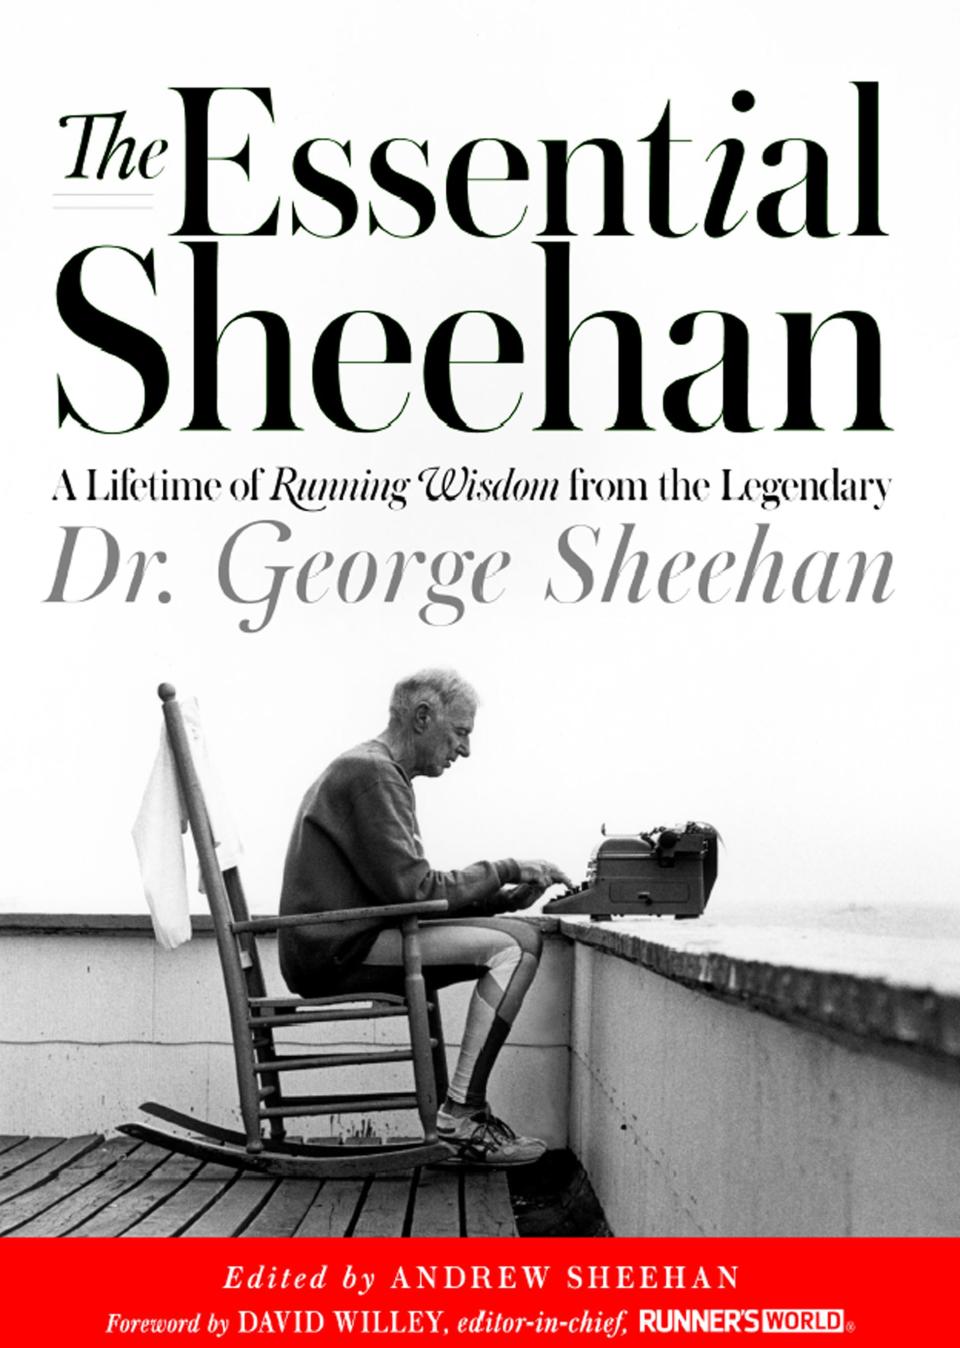 Cover of 'The Essential Sheehan,' a collection of George Sheehan's best work